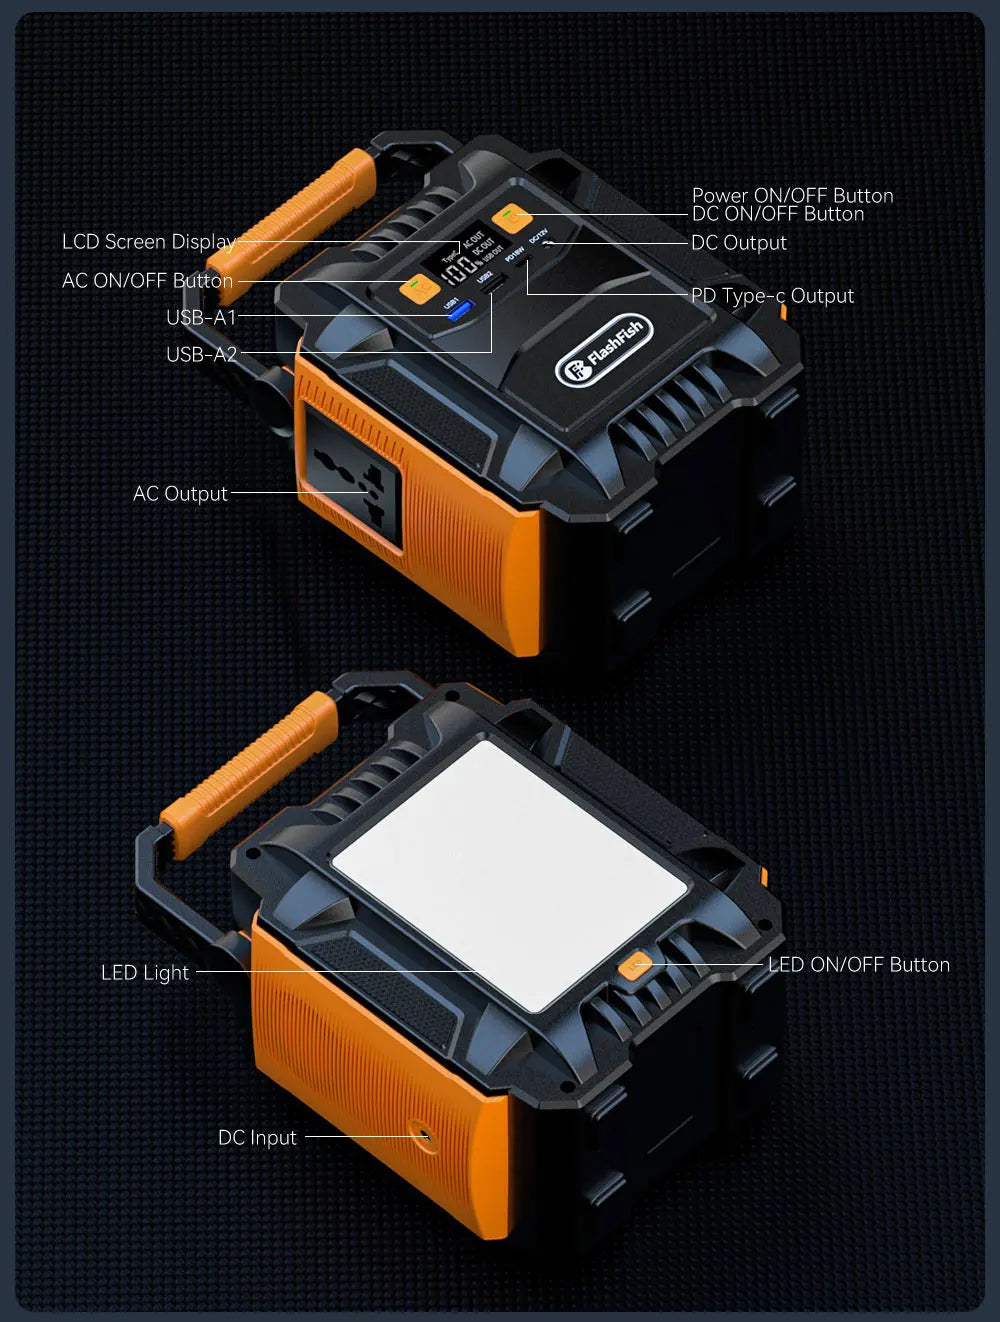 Portable power station with intuitive interface, multiple output options, and LED light.